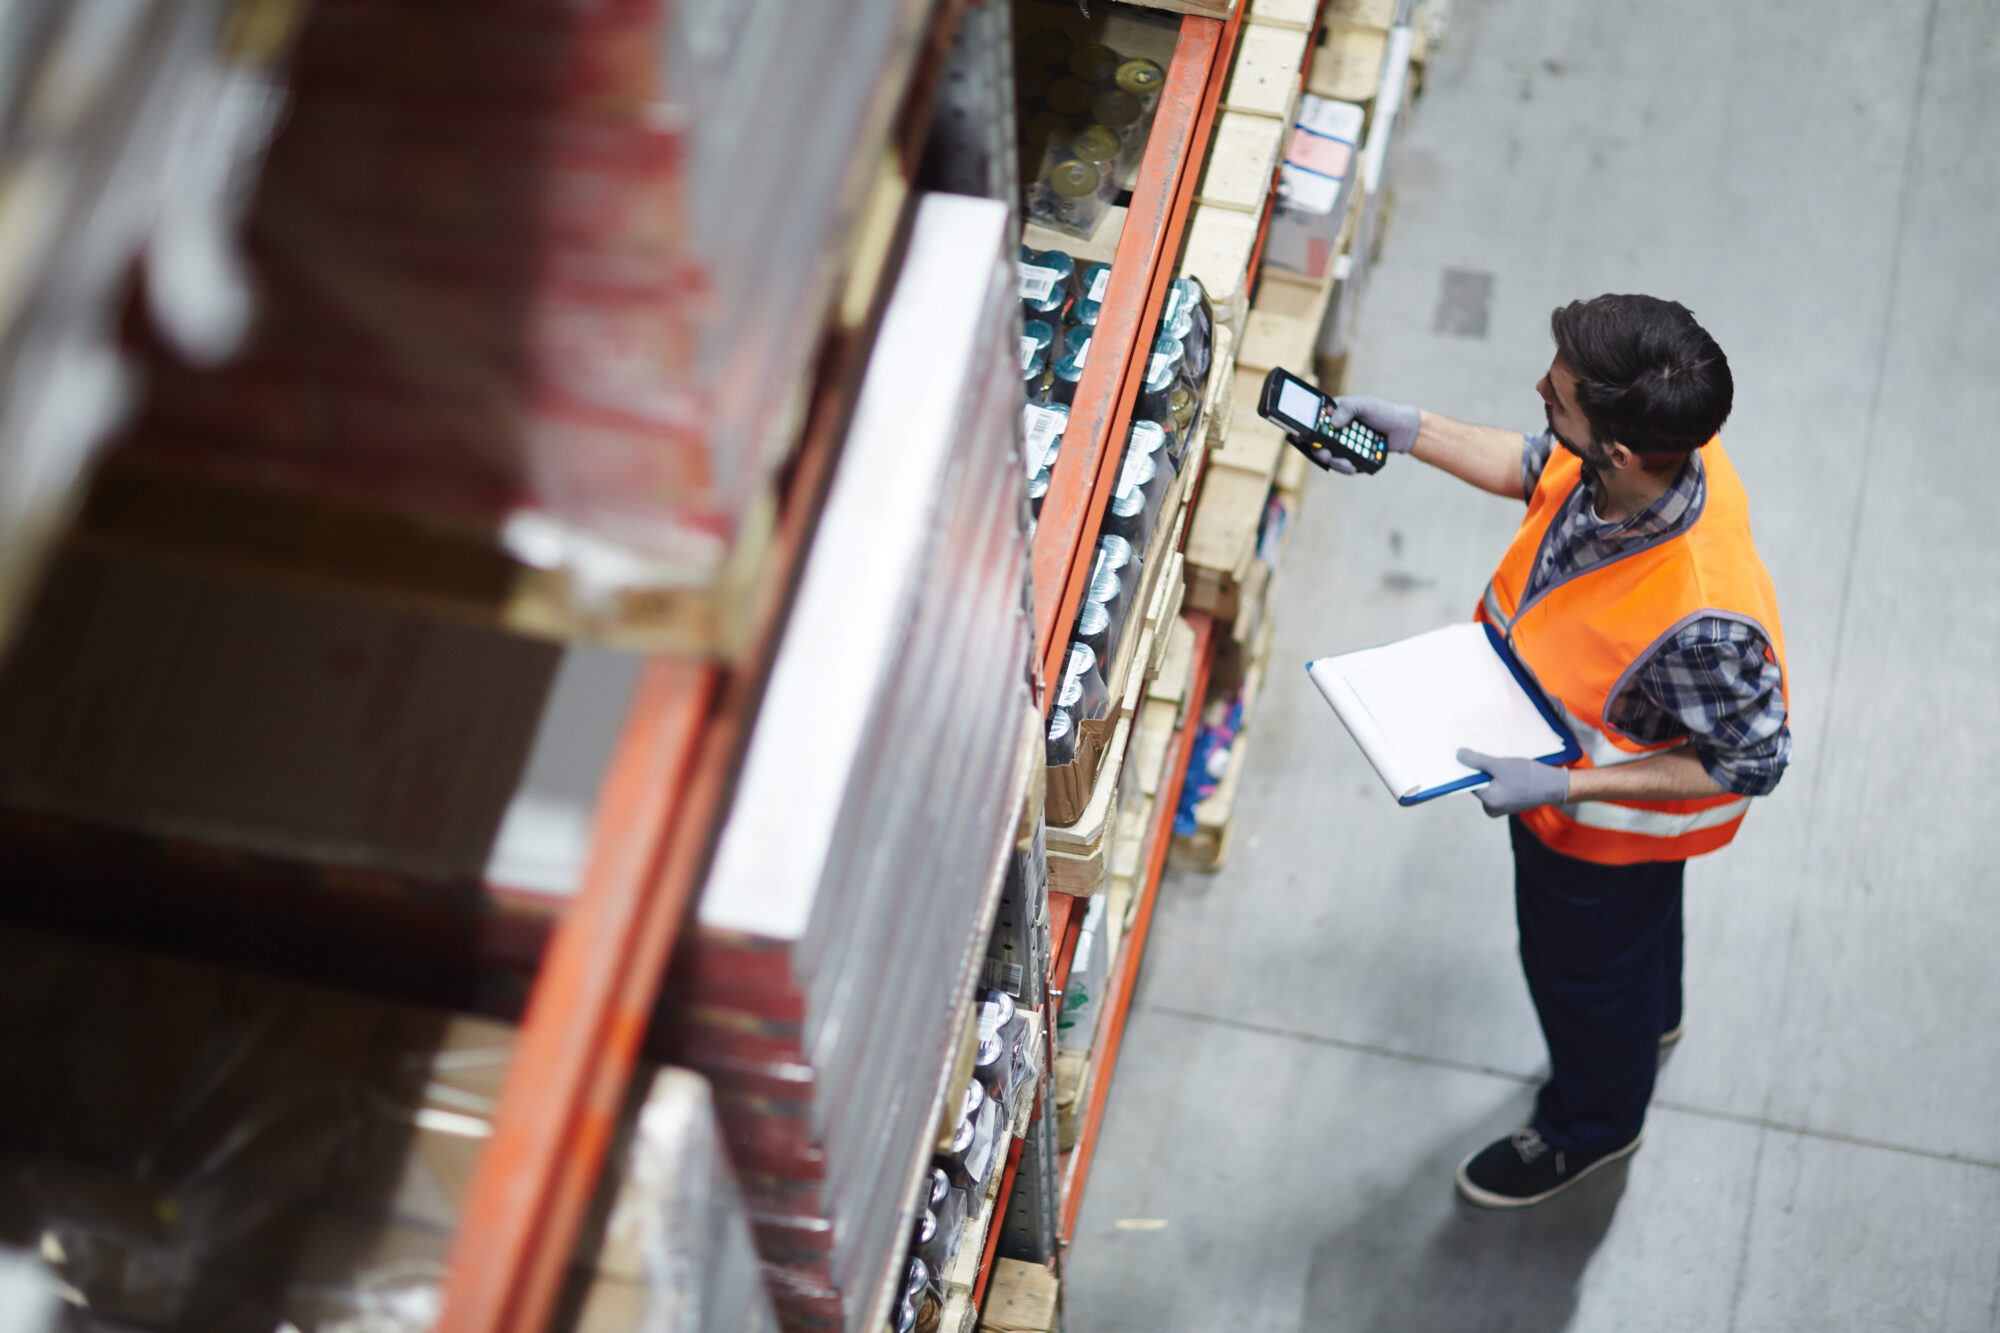 What are the Most Common North Carolina Warehouse and Distribution Center Accidents and Injuries?